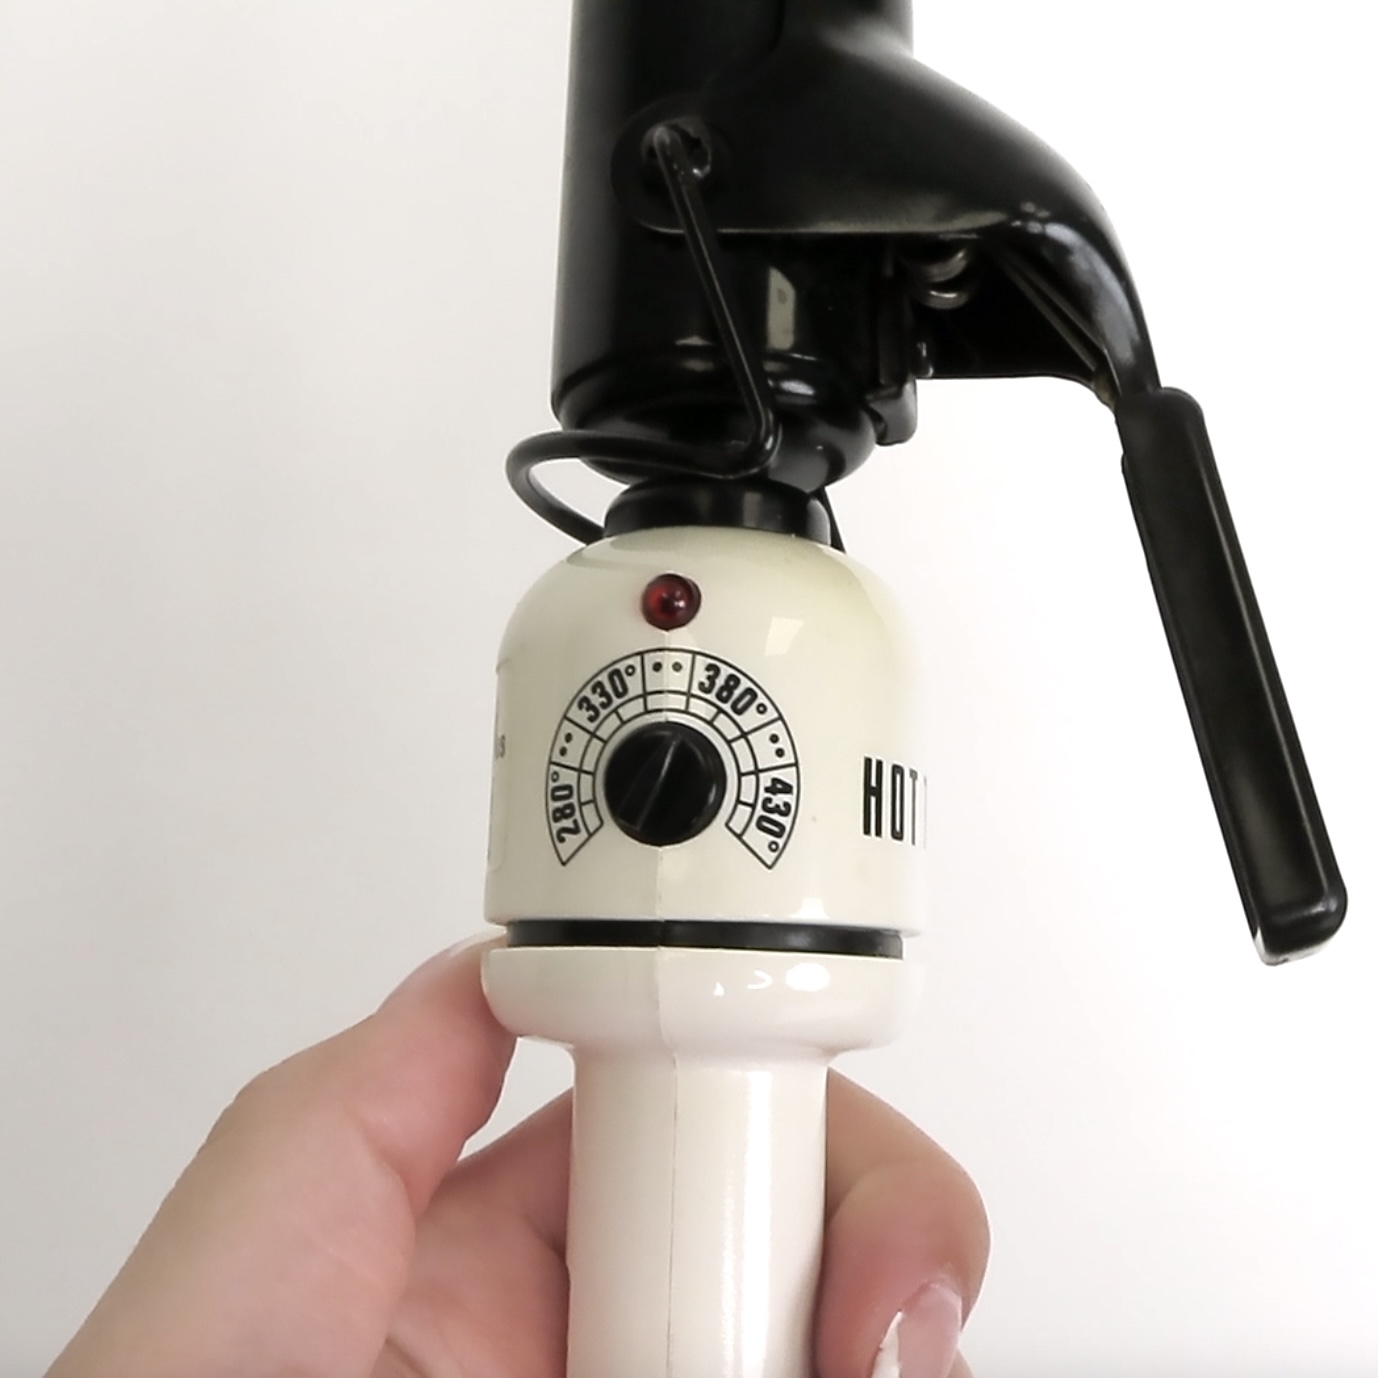 setting temperature of curling iron to under 400 degrees